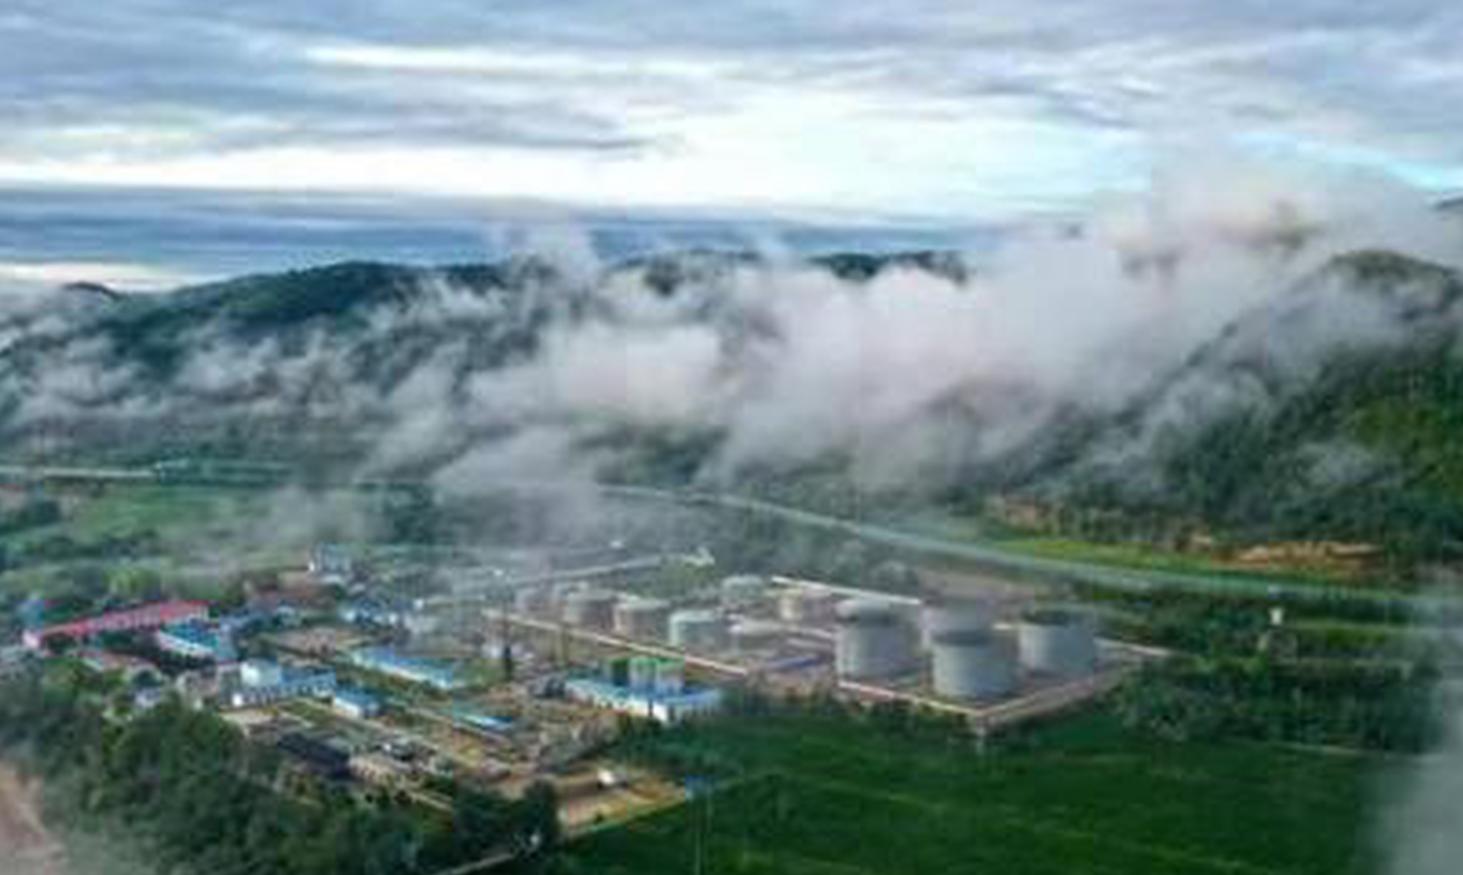 First super-large natural gas field with annual output of 50 bln cubic meters built in China